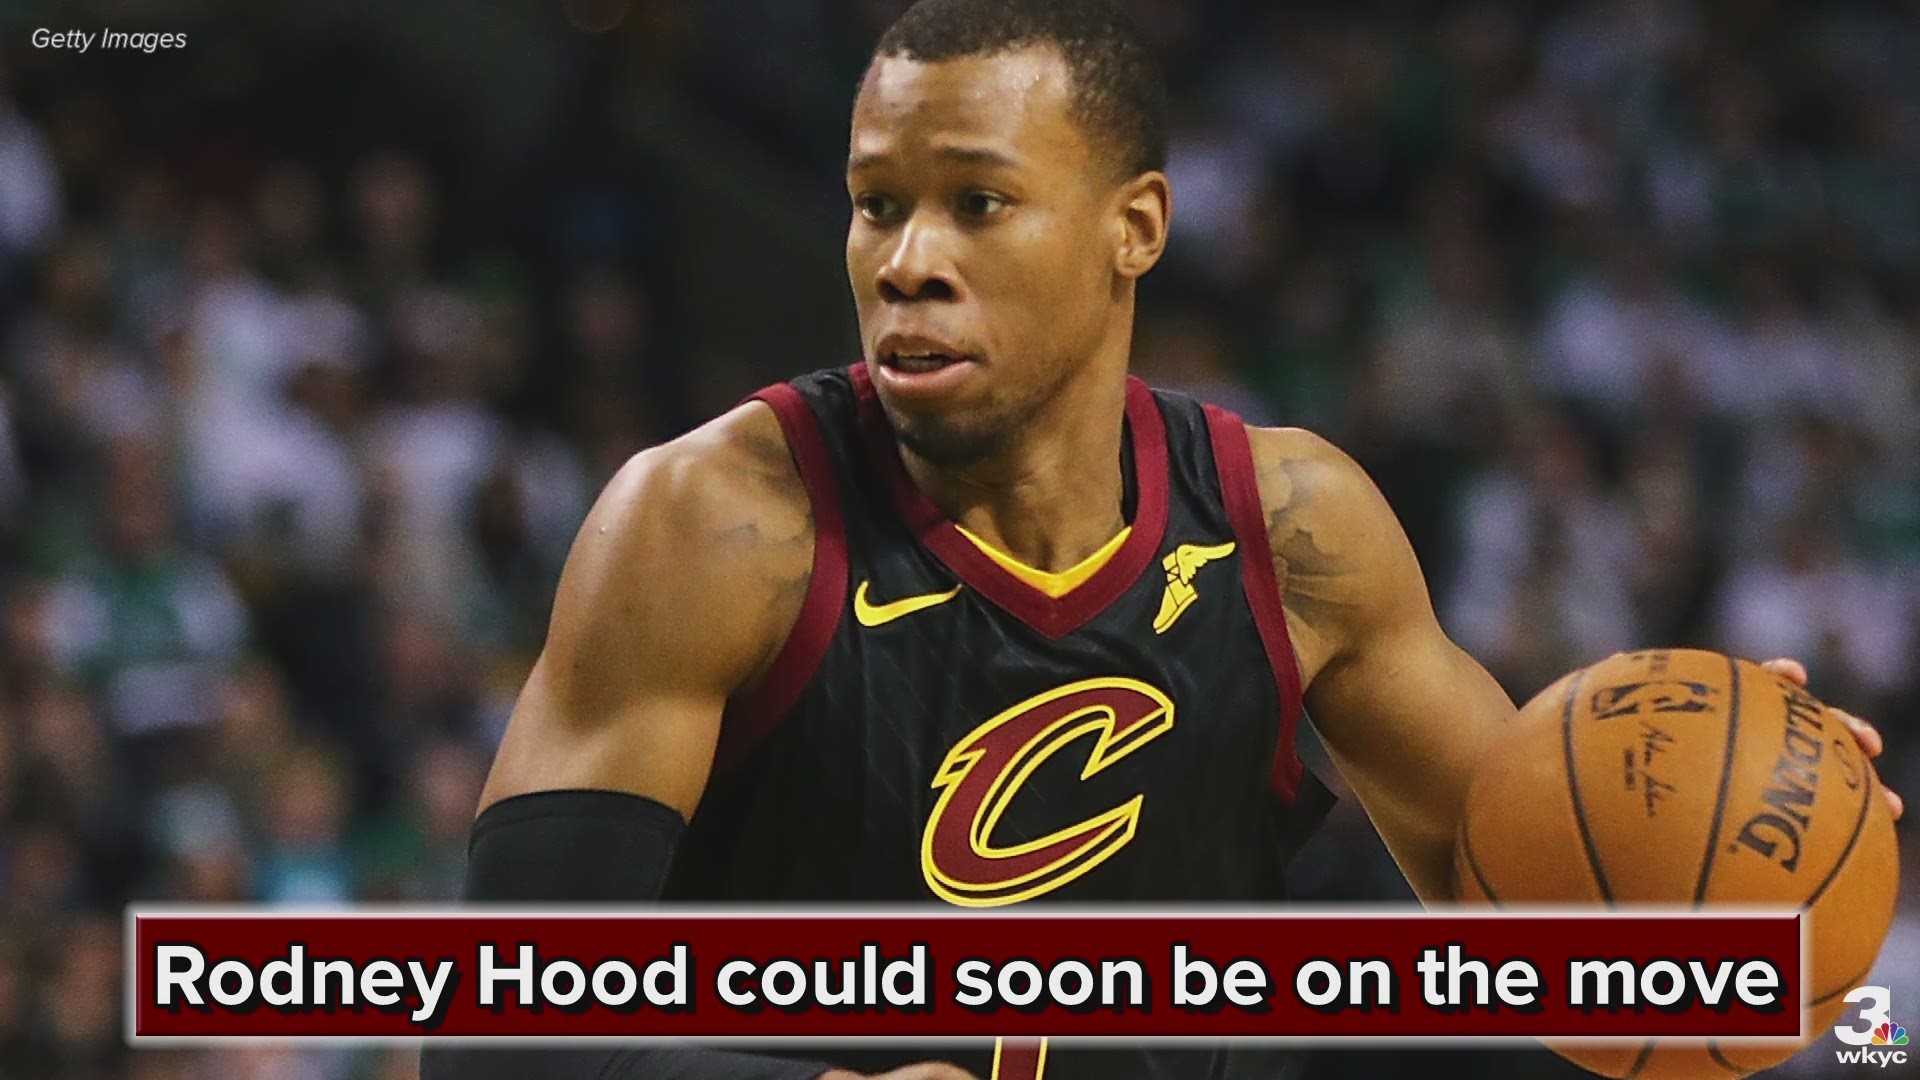 According to Shams Charania of The Athletic, Cleveland Cavaliers shooting guard Rodney Hood could soon be on the move.